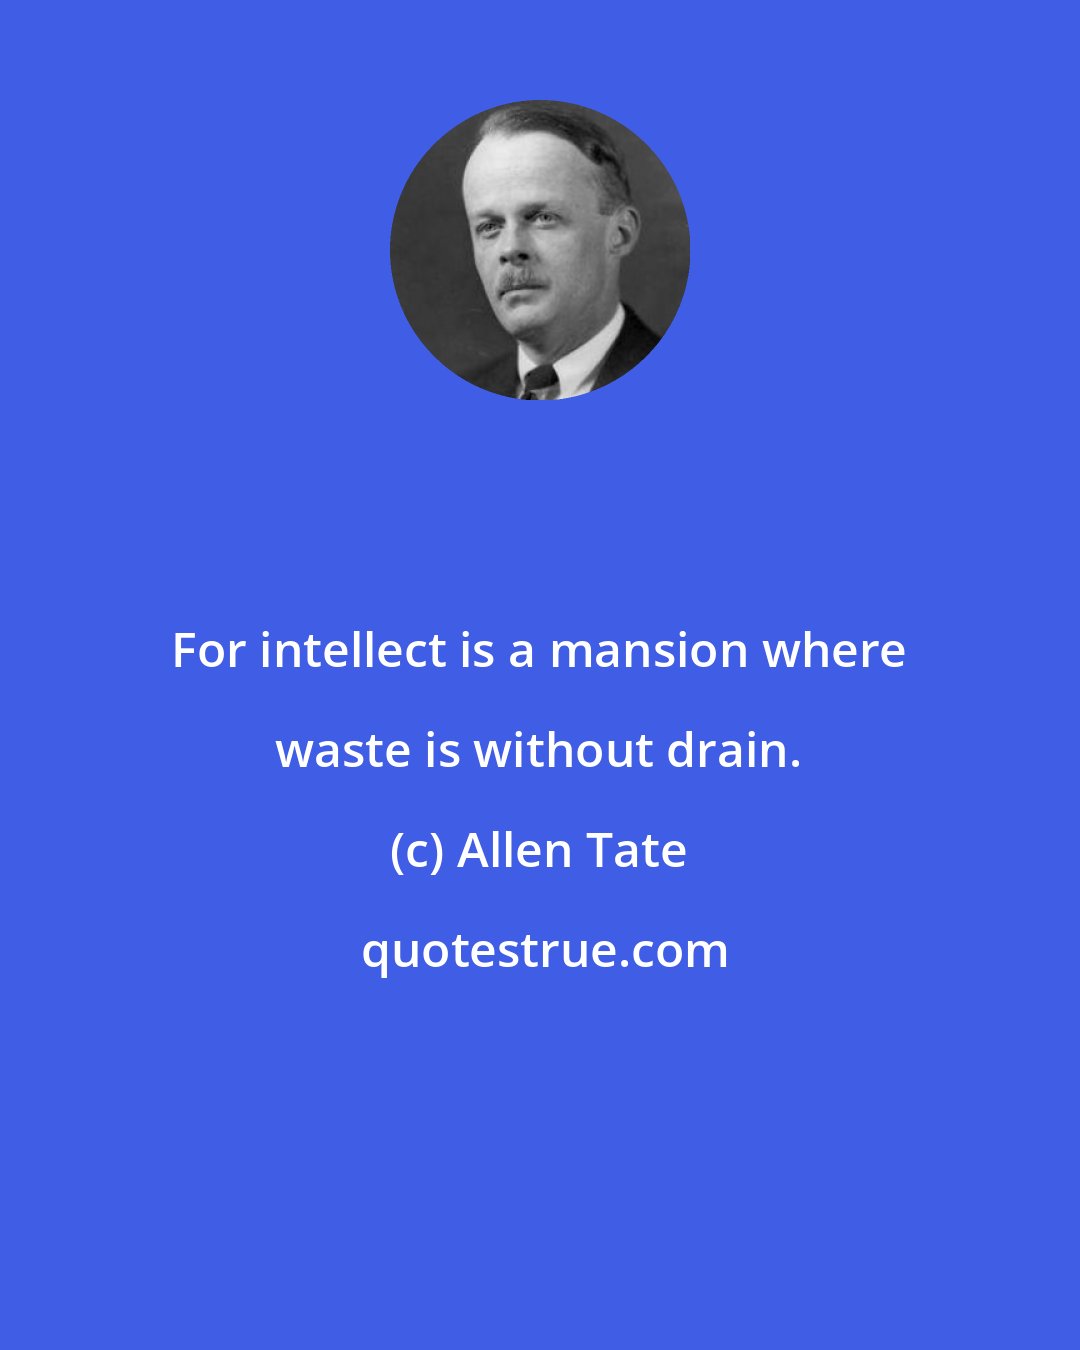 Allen Tate: For intellect is a mansion where waste is without drain.